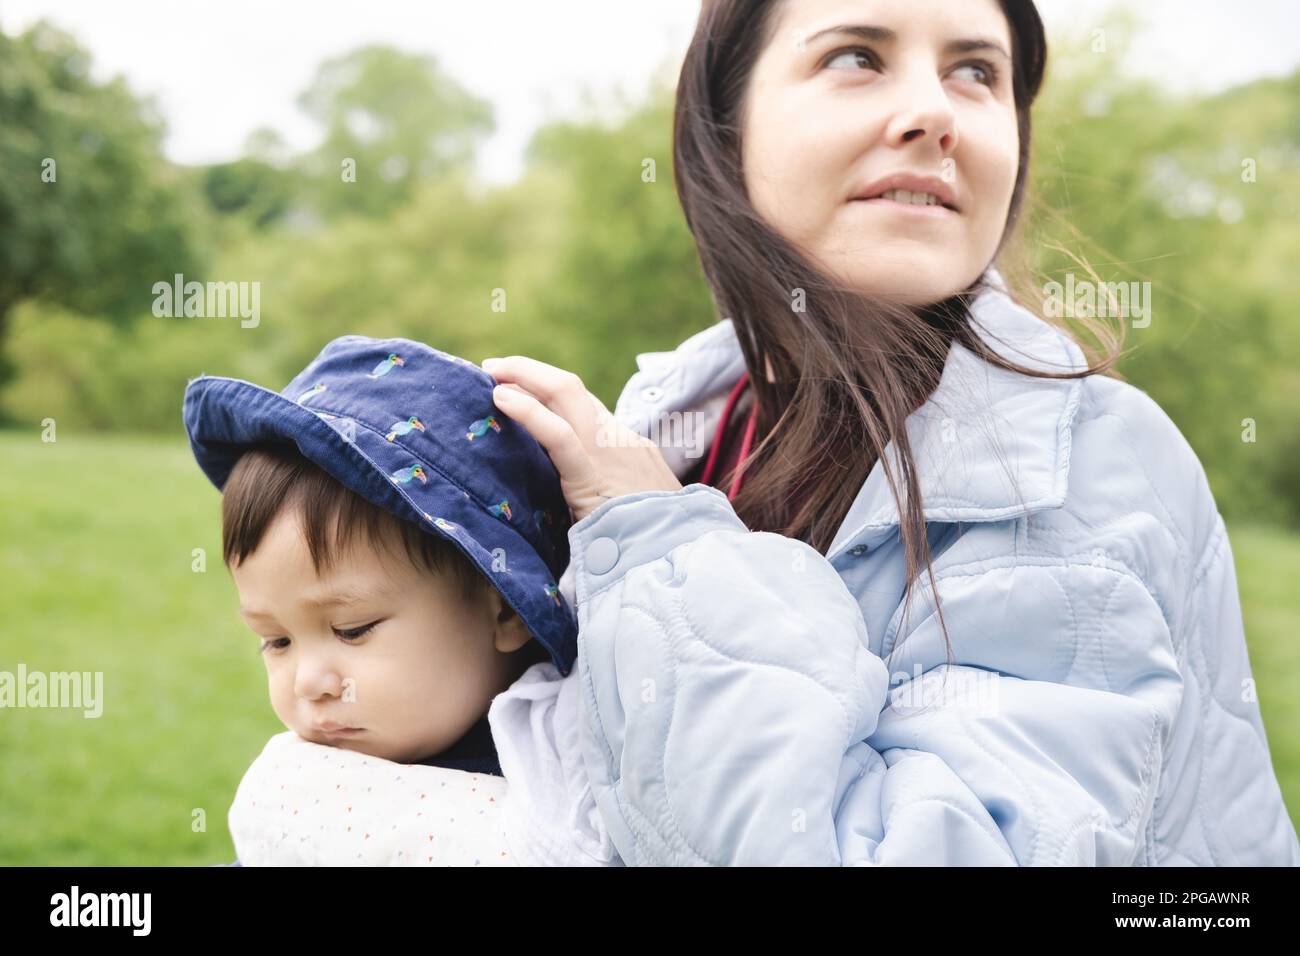 Close-up photo of a male infant carried by his smiley mother on a baby carrier wearing a blue hat walking at the park. He is feeling poor and ill. Mul Stock Photo